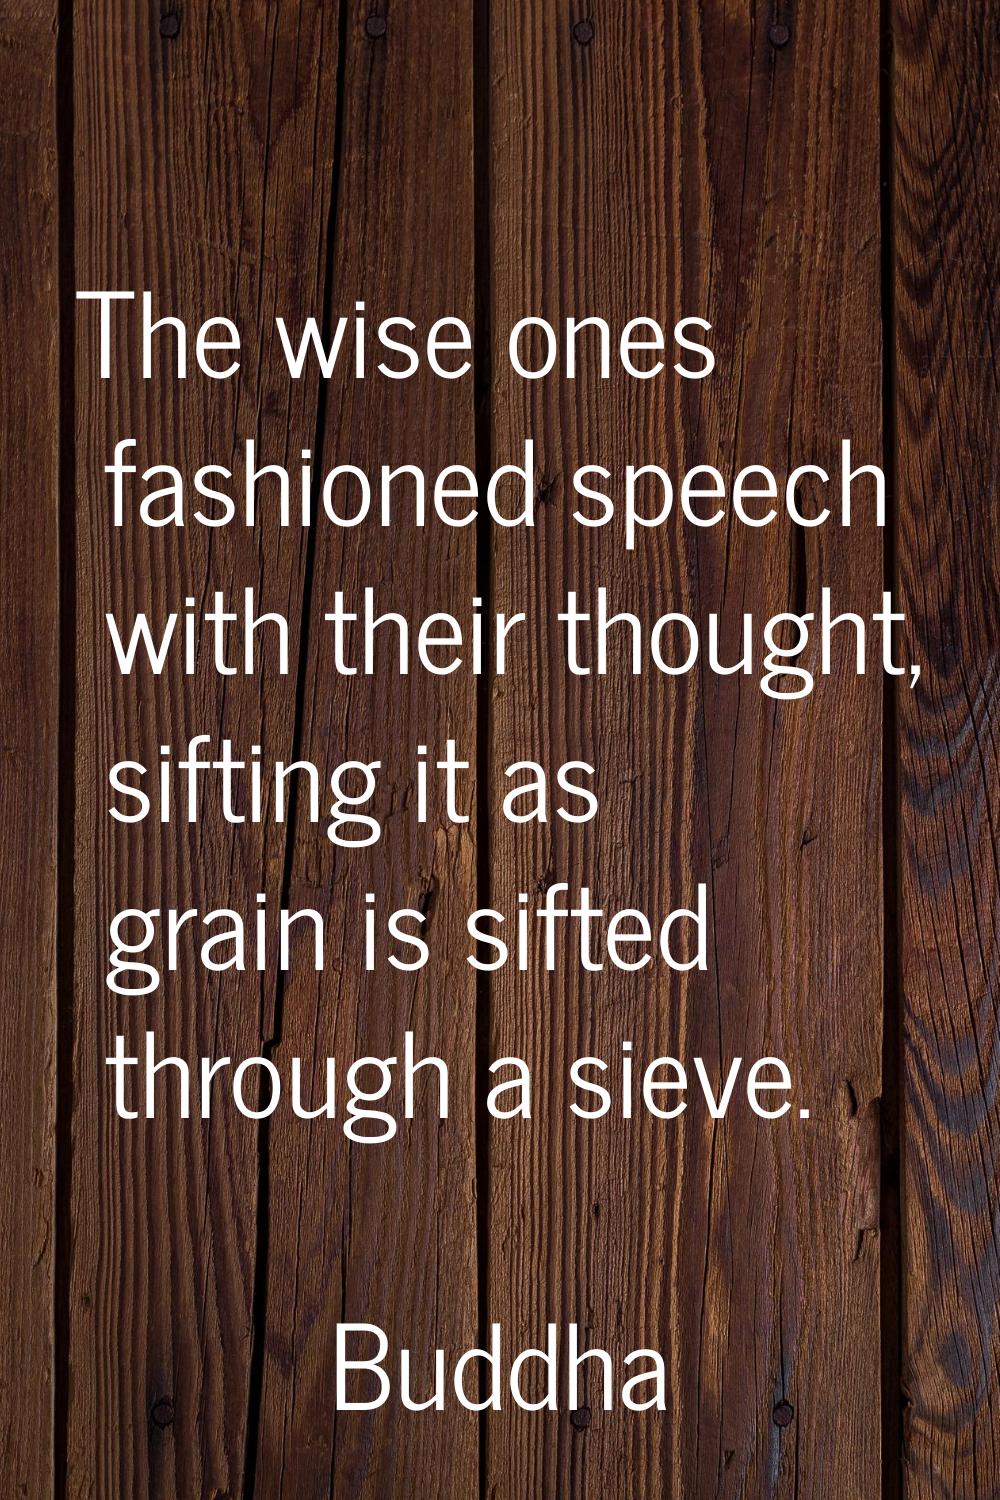 The wise ones fashioned speech with their thought, sifting it as grain is sifted through a sieve.